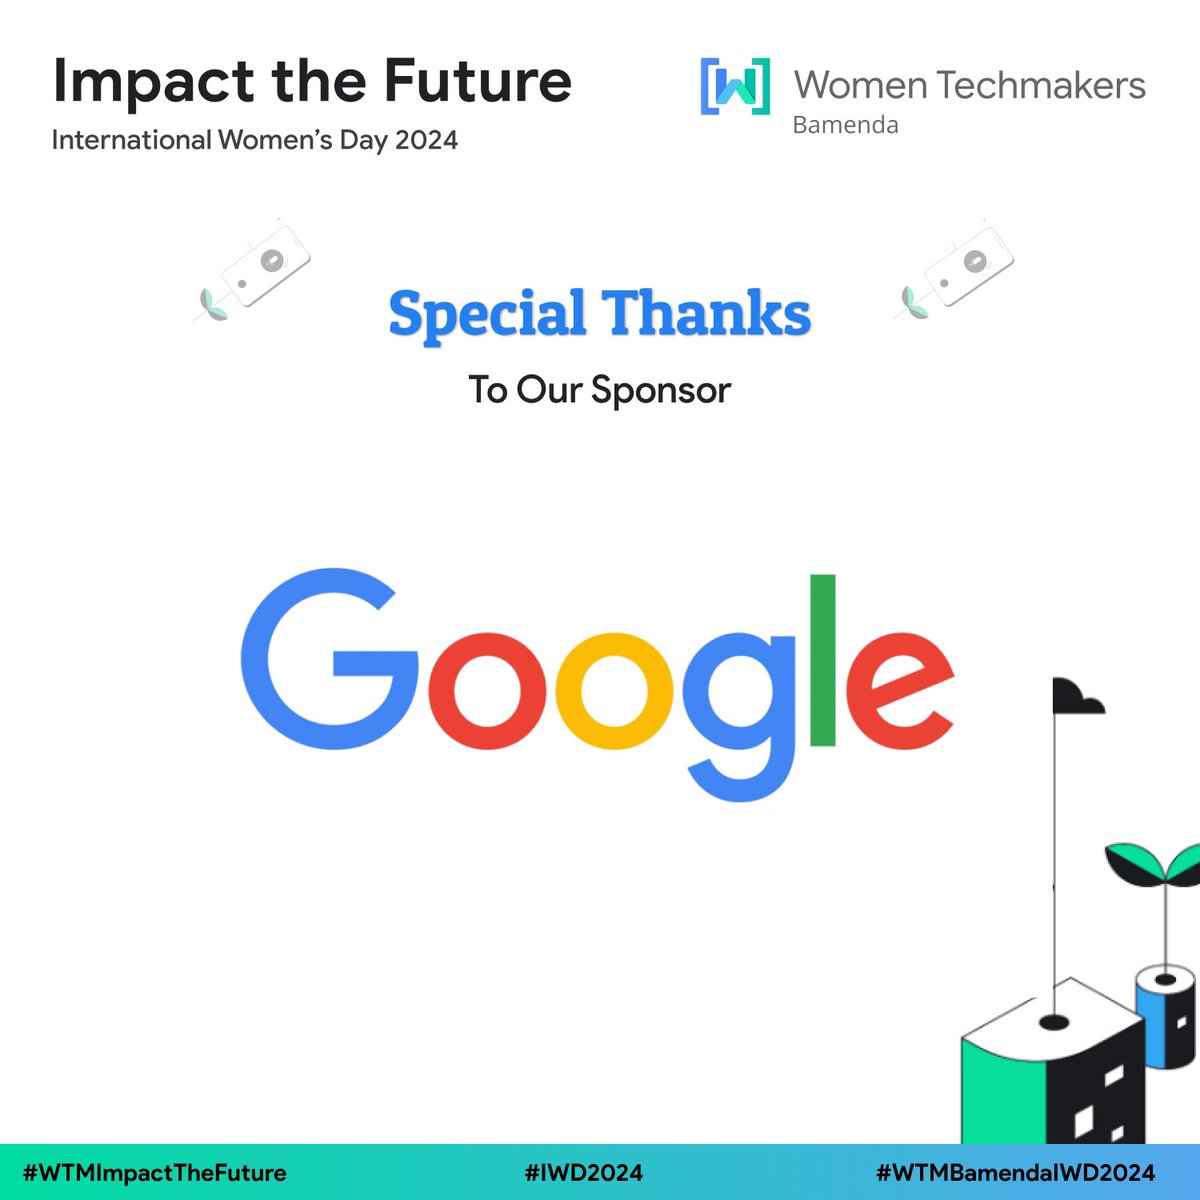 A huge shoutout to our amazing sponsor @Google for their incredible support in making the #WTMBamendaIWD event a reality! 

Thank you for championing #WomenInTech & driving positive change in the industry. Your sponsorship has been invaluable! 🙌

#IWD2024
#Impactthefuture